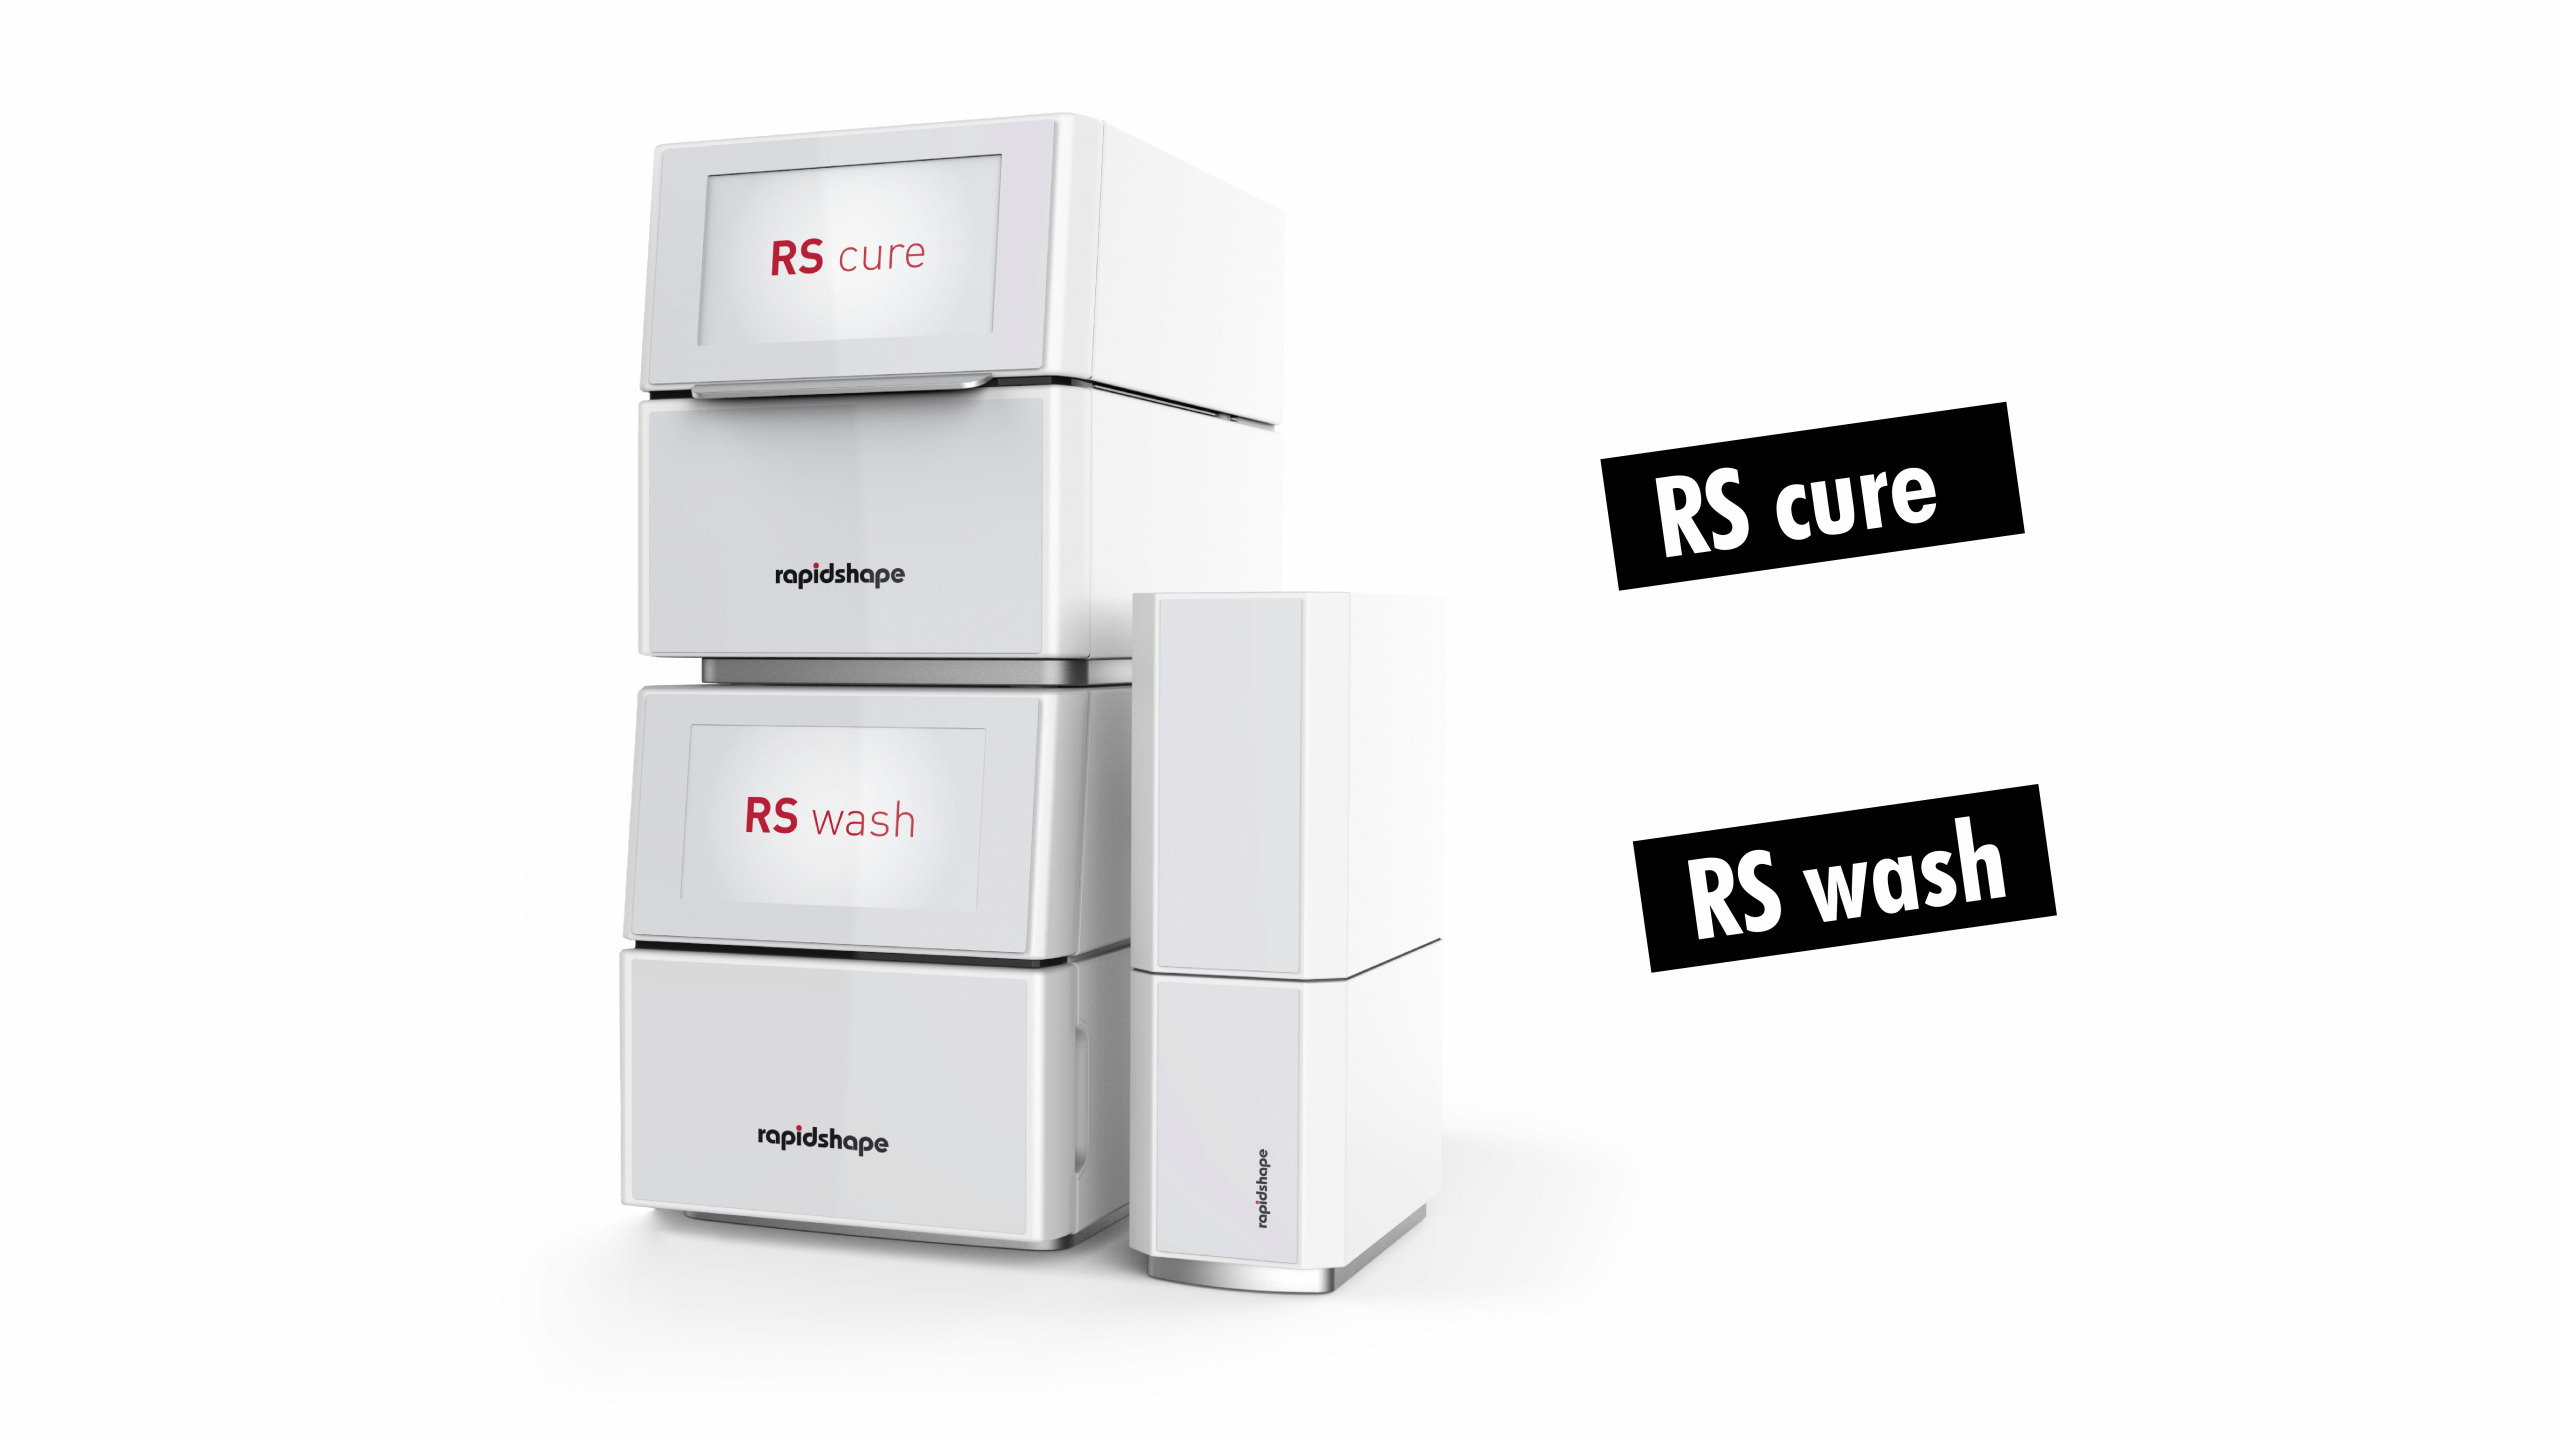 Image of RS cure and RS wash